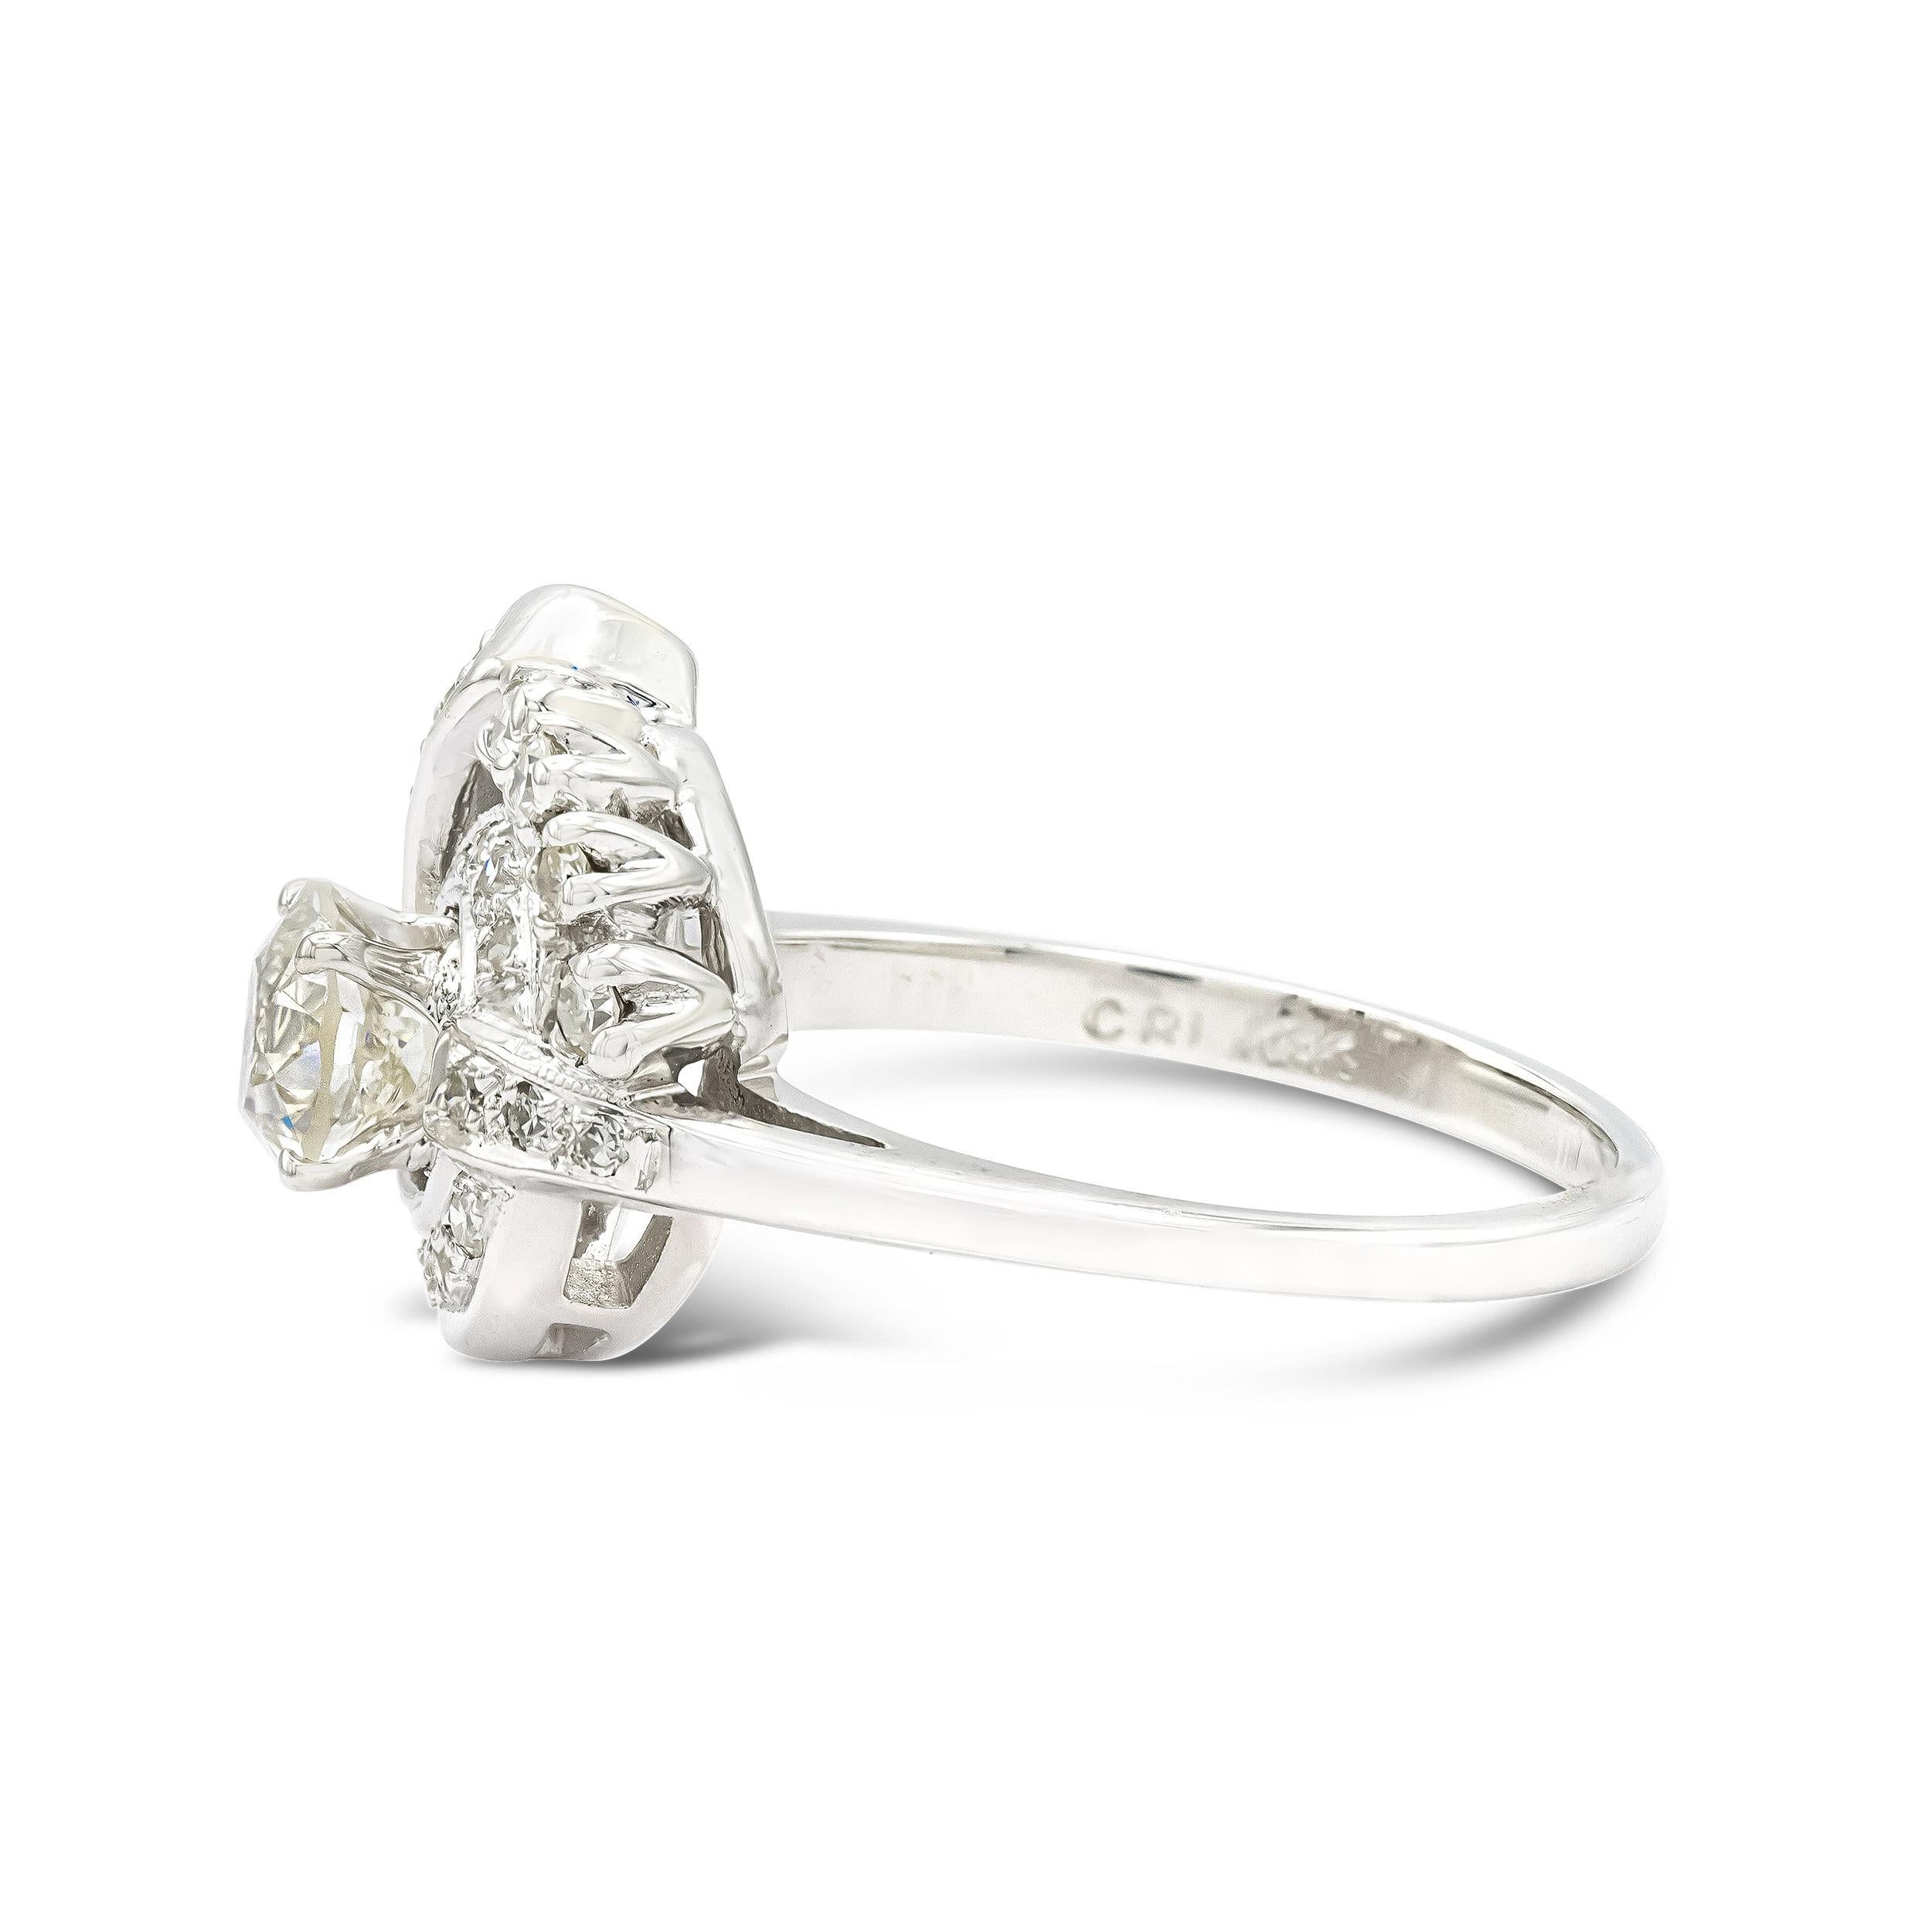 Old European Cut Vintage 0.72 Ct. Diamond Engagement Ring GIA I SI1 in 14kt White Gold For Sale